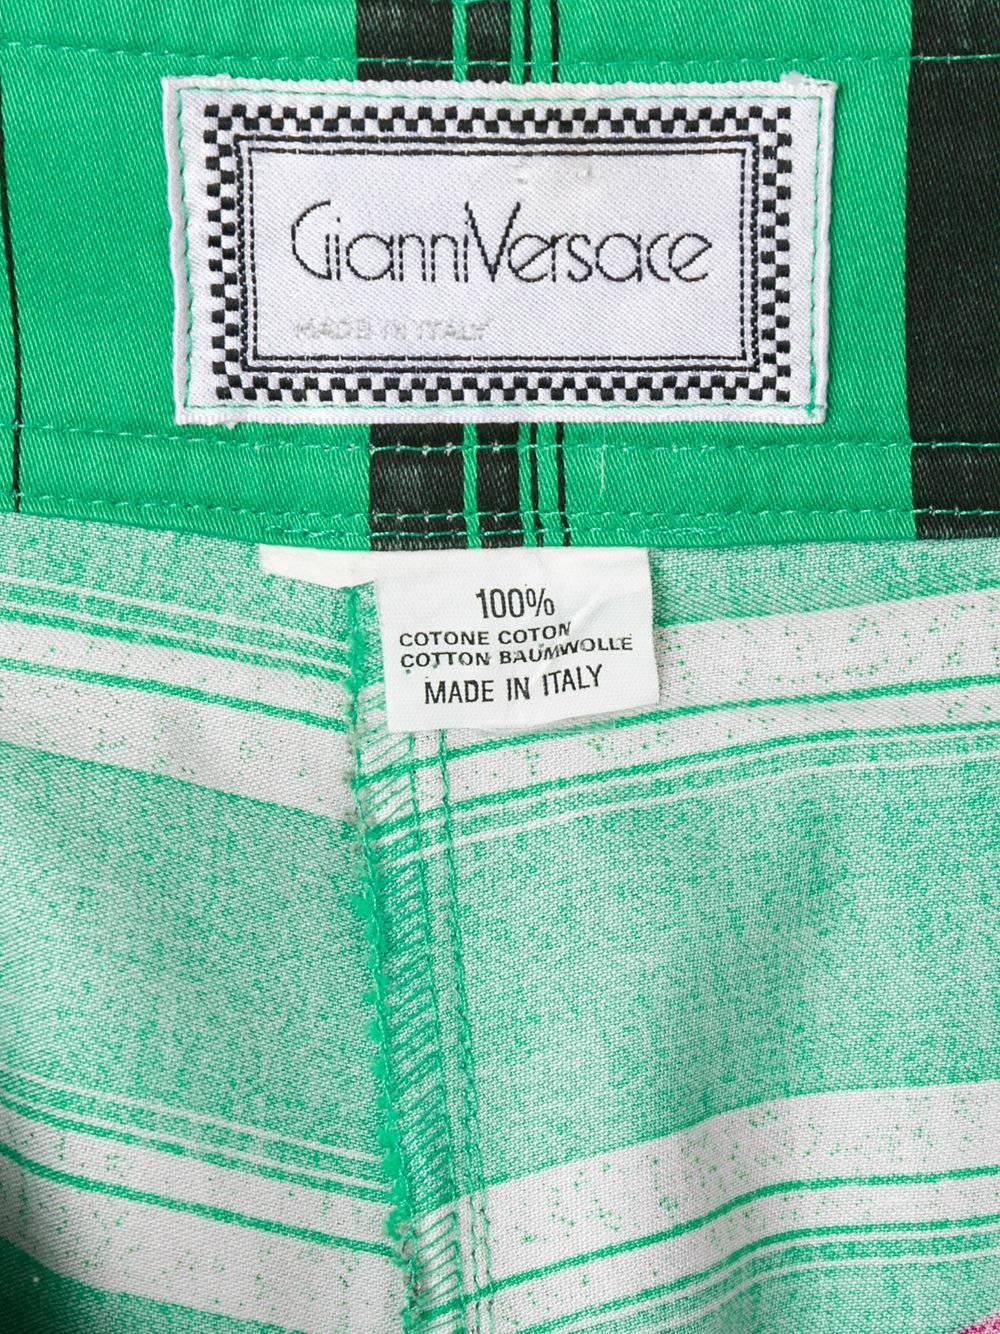 1980s GIANNI VERSACE high-waist shorts In Excellent Condition For Sale In London, GB